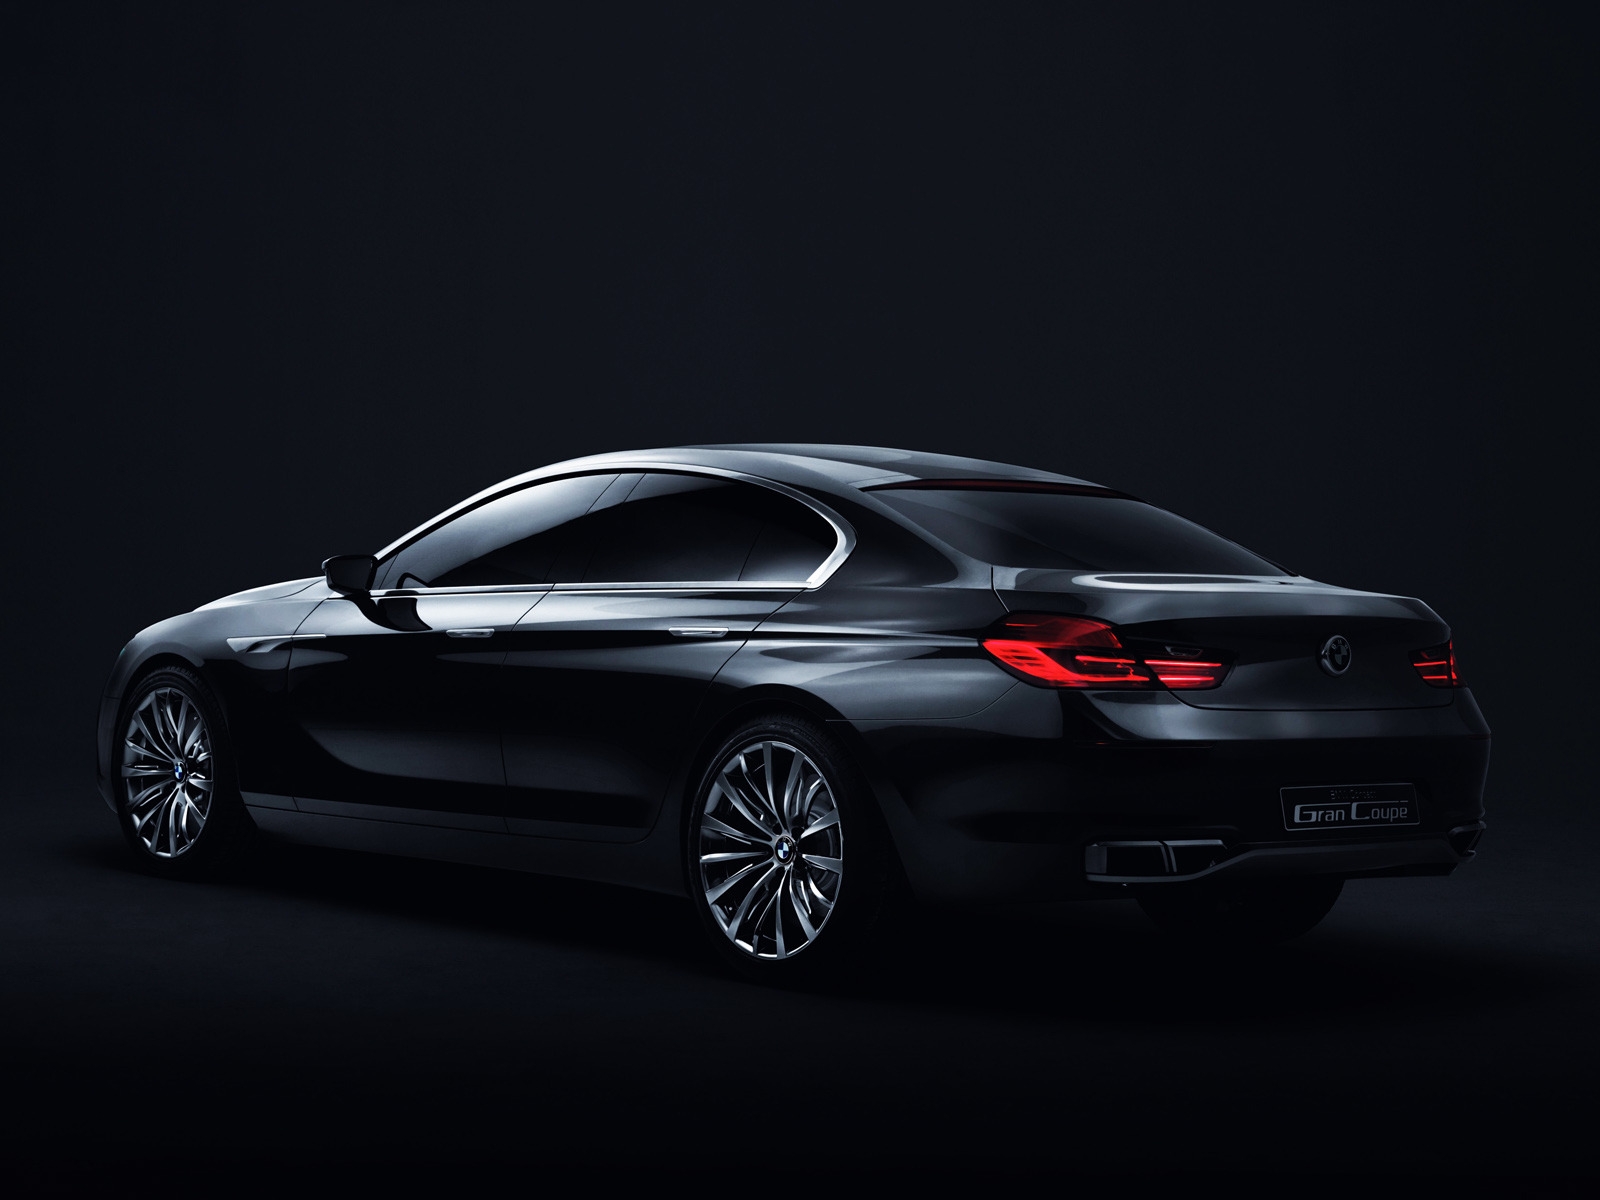 BMW Gran Coupe Rear for 1600 x 1200 resolution